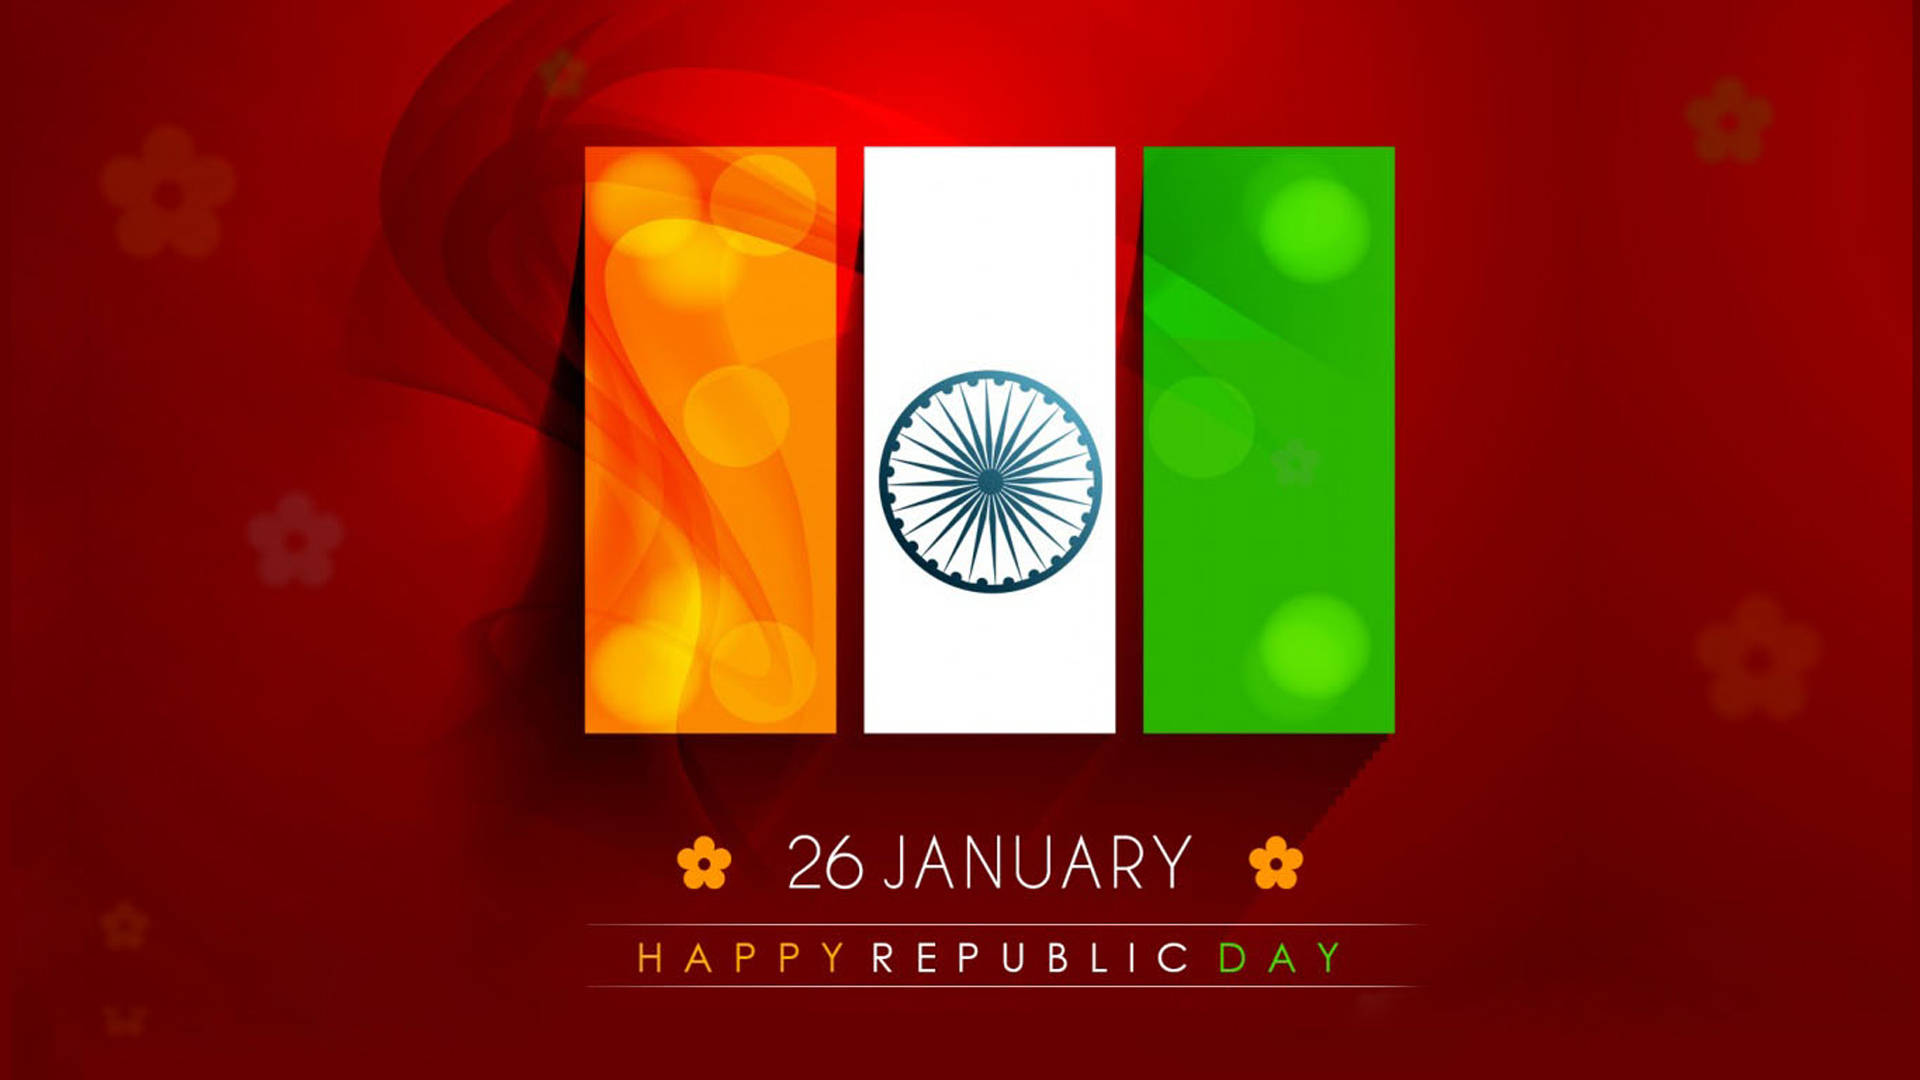 Authentic Representation Of The Tricolor On Republic Day Background